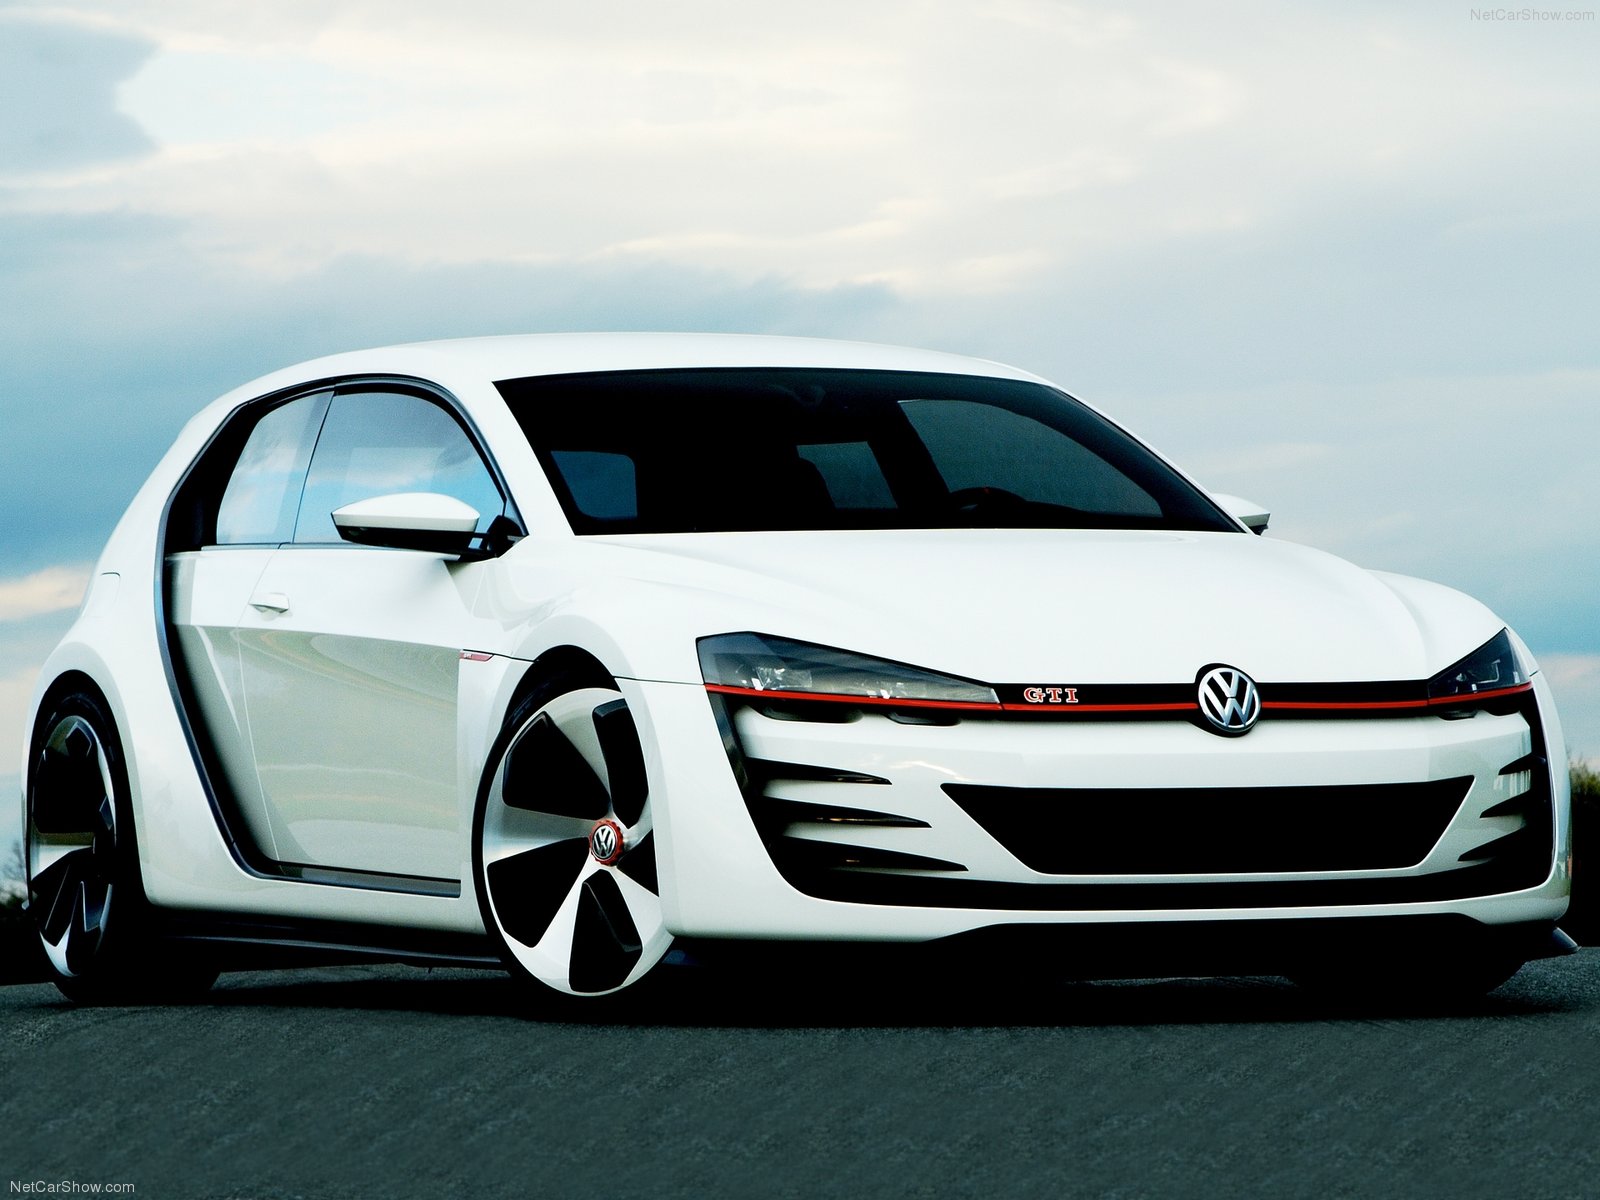 Vision Gti Volkswagen Recent Posts The Vw Golf Goes Hybrid January